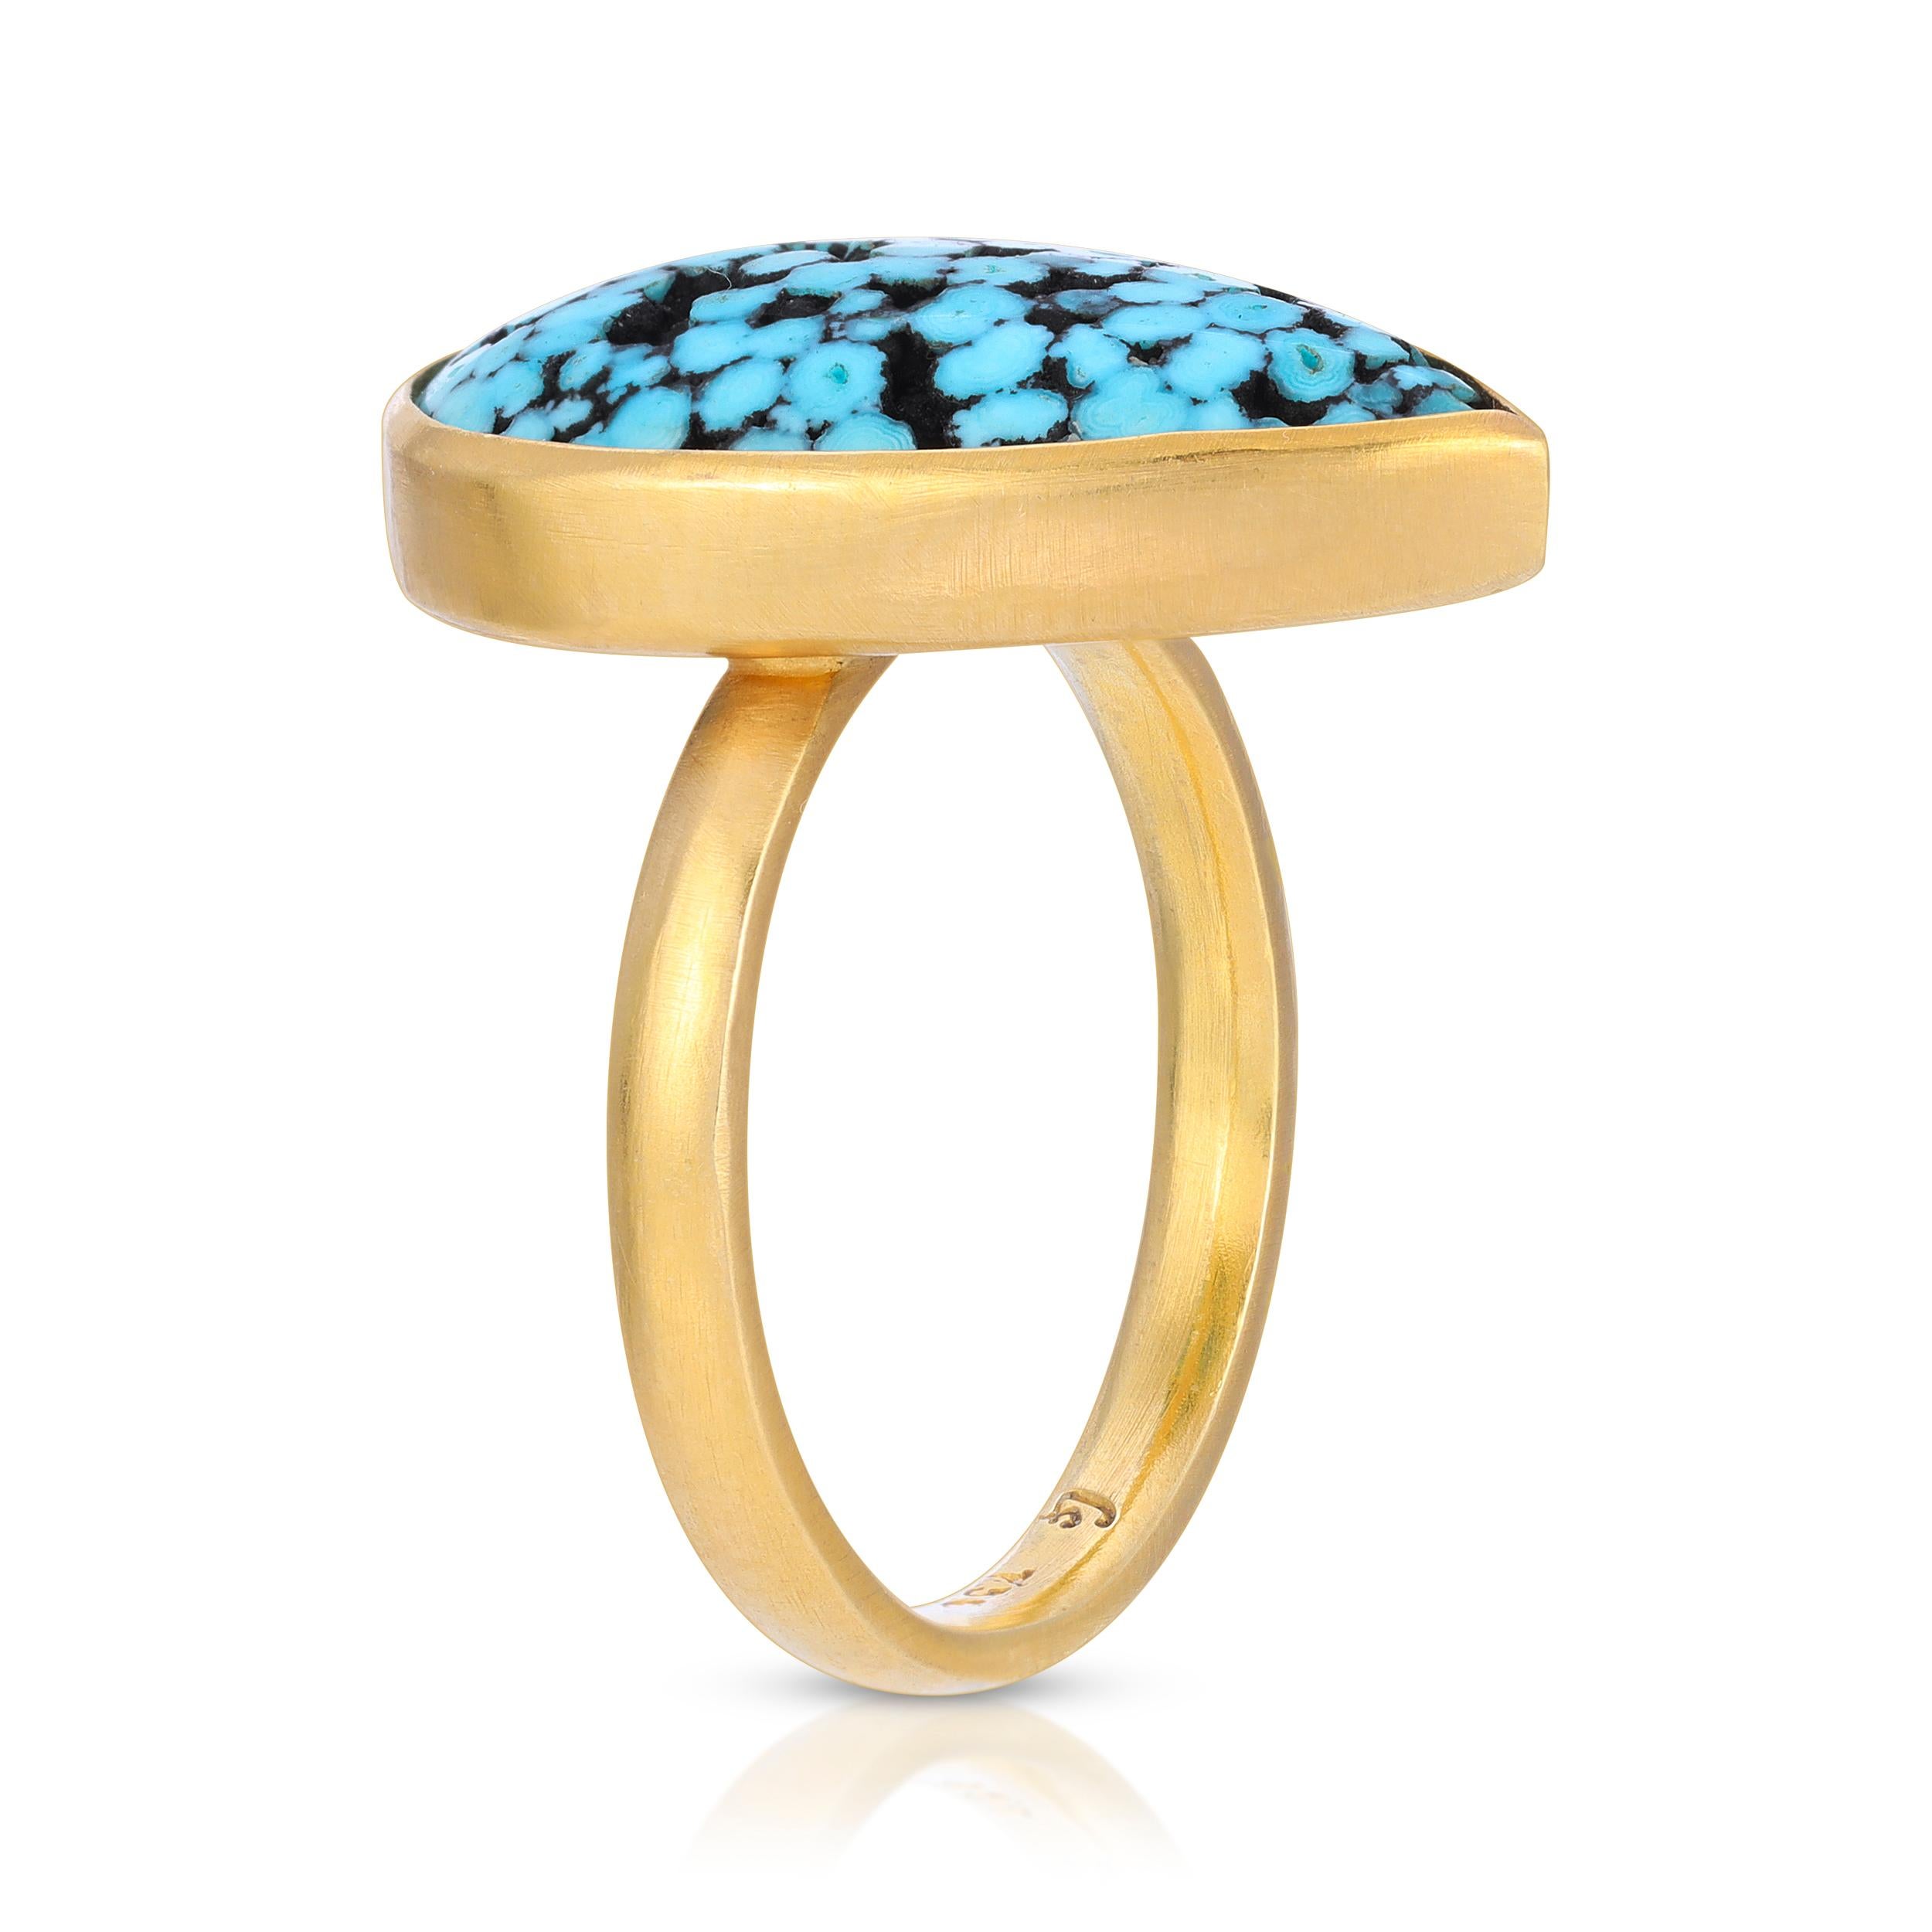 Teardrop Matrix turquoise Ring in 18k Matte Finished Yellow Gold size 6. Handmade in Los Angeles